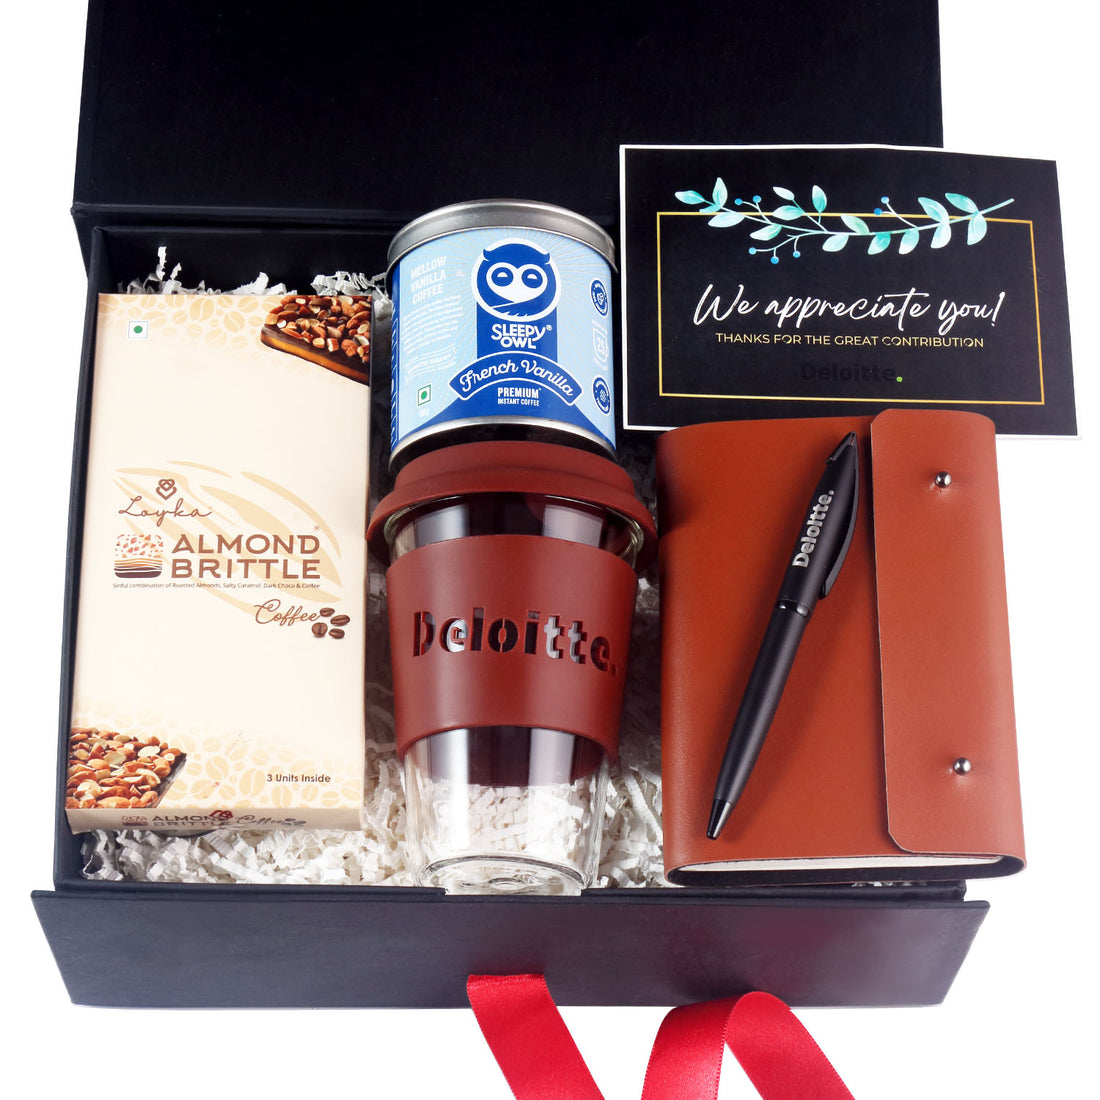 The Pamper Hamper - Coffee mug, Soy wax candle and more!